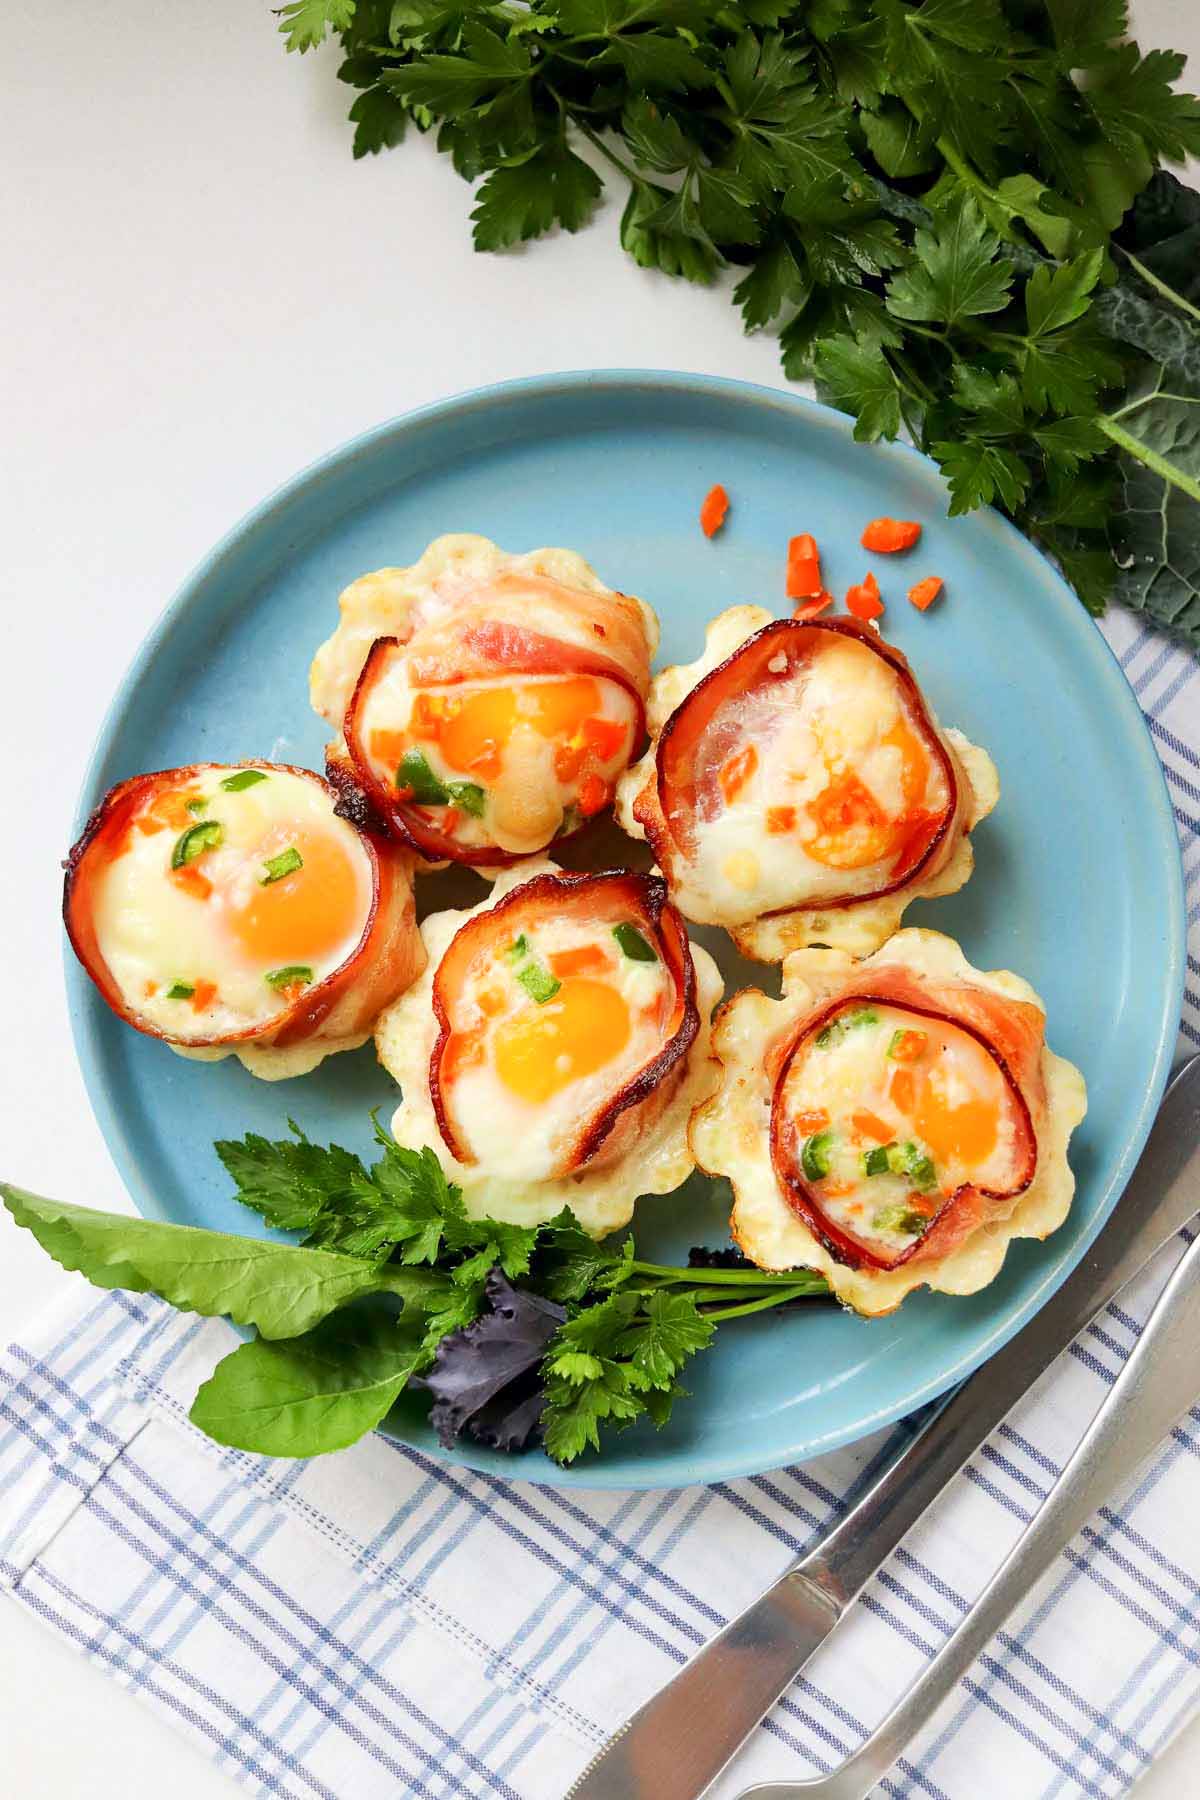 Egg cups on a plate garnished with lettuce.